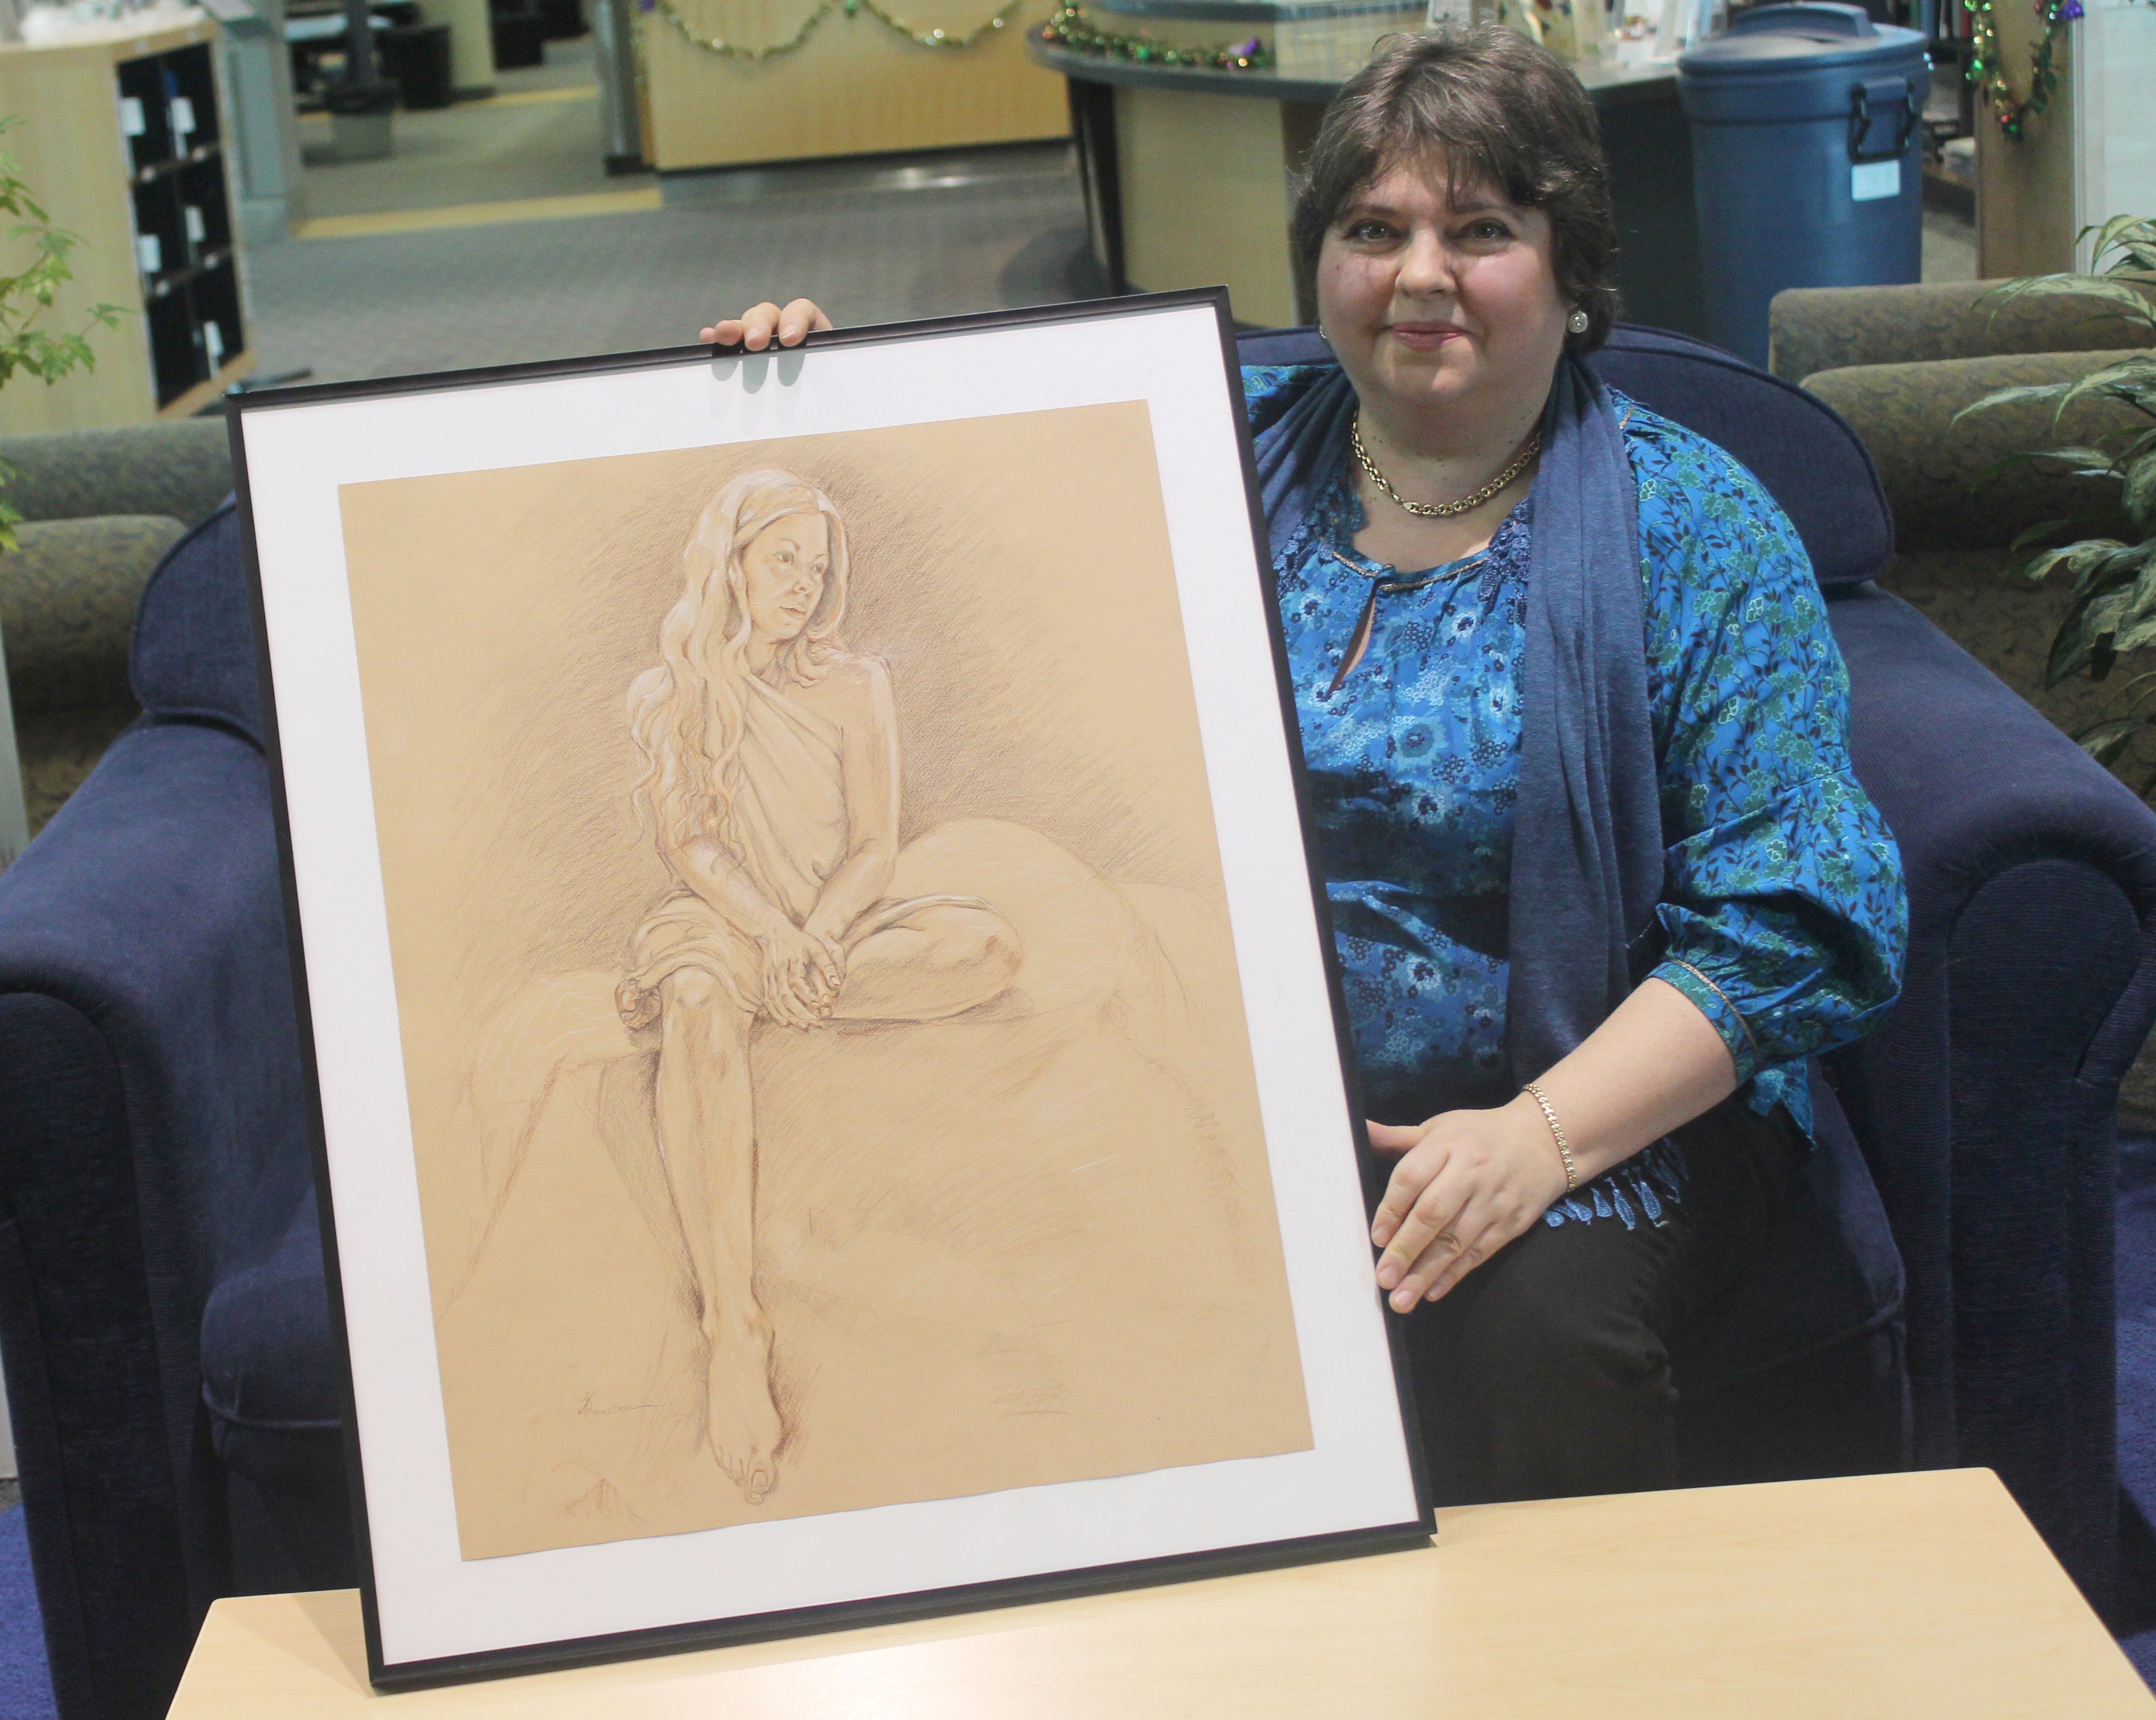 BEAUTY ON DISPLAY - Elena Rousseau has some of her new works in an exhibit called The Importance of Line on display at the Red Deer College Library.